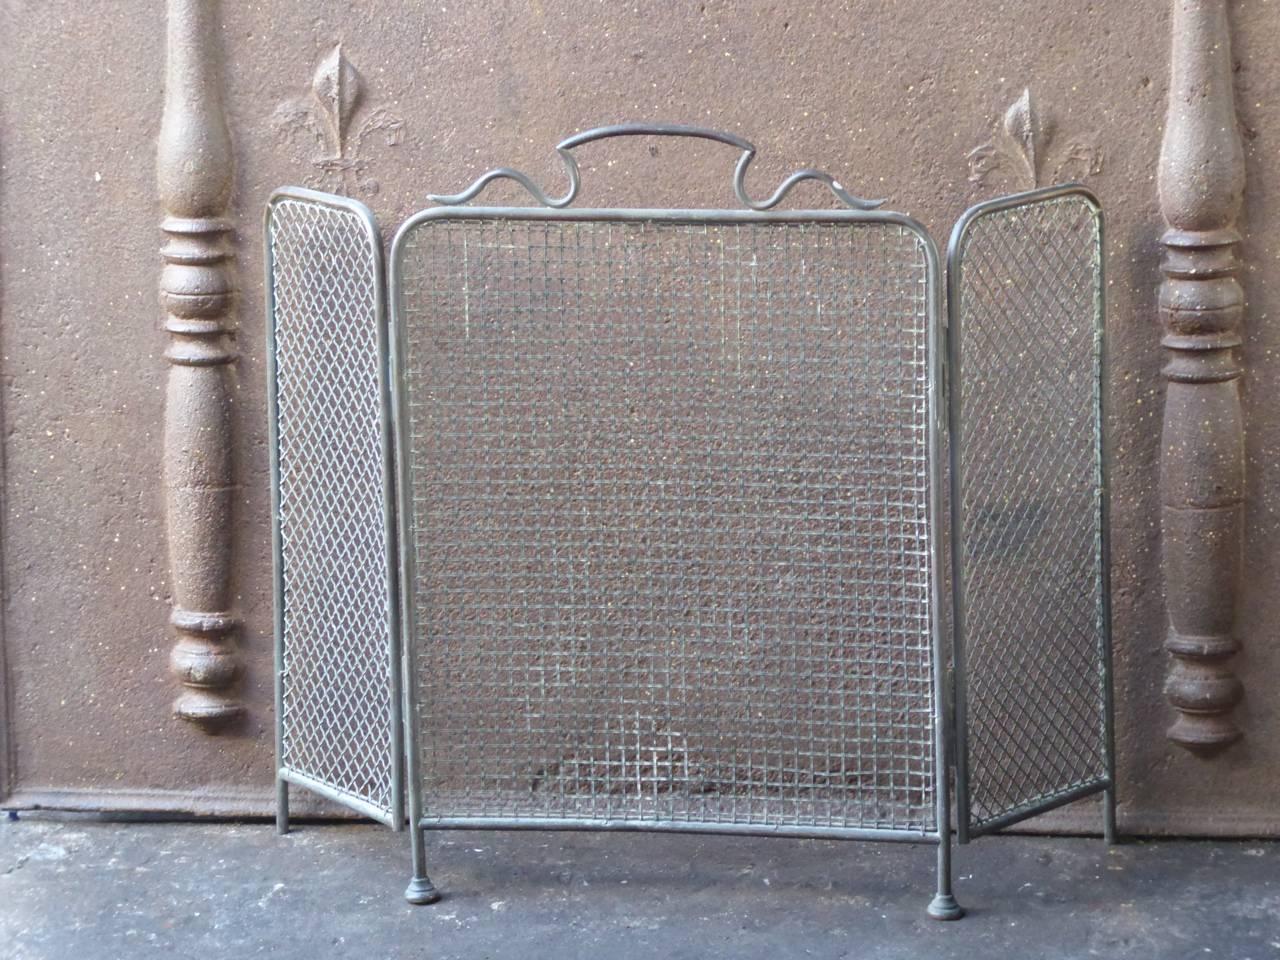 19th century English Victorian fireplace screen made of brass and iron mesh. The screen has three panels.

We have a unique and specialized collection of antique and used fireplace accessories consisting of more than 1000 listings at 1stdibs.